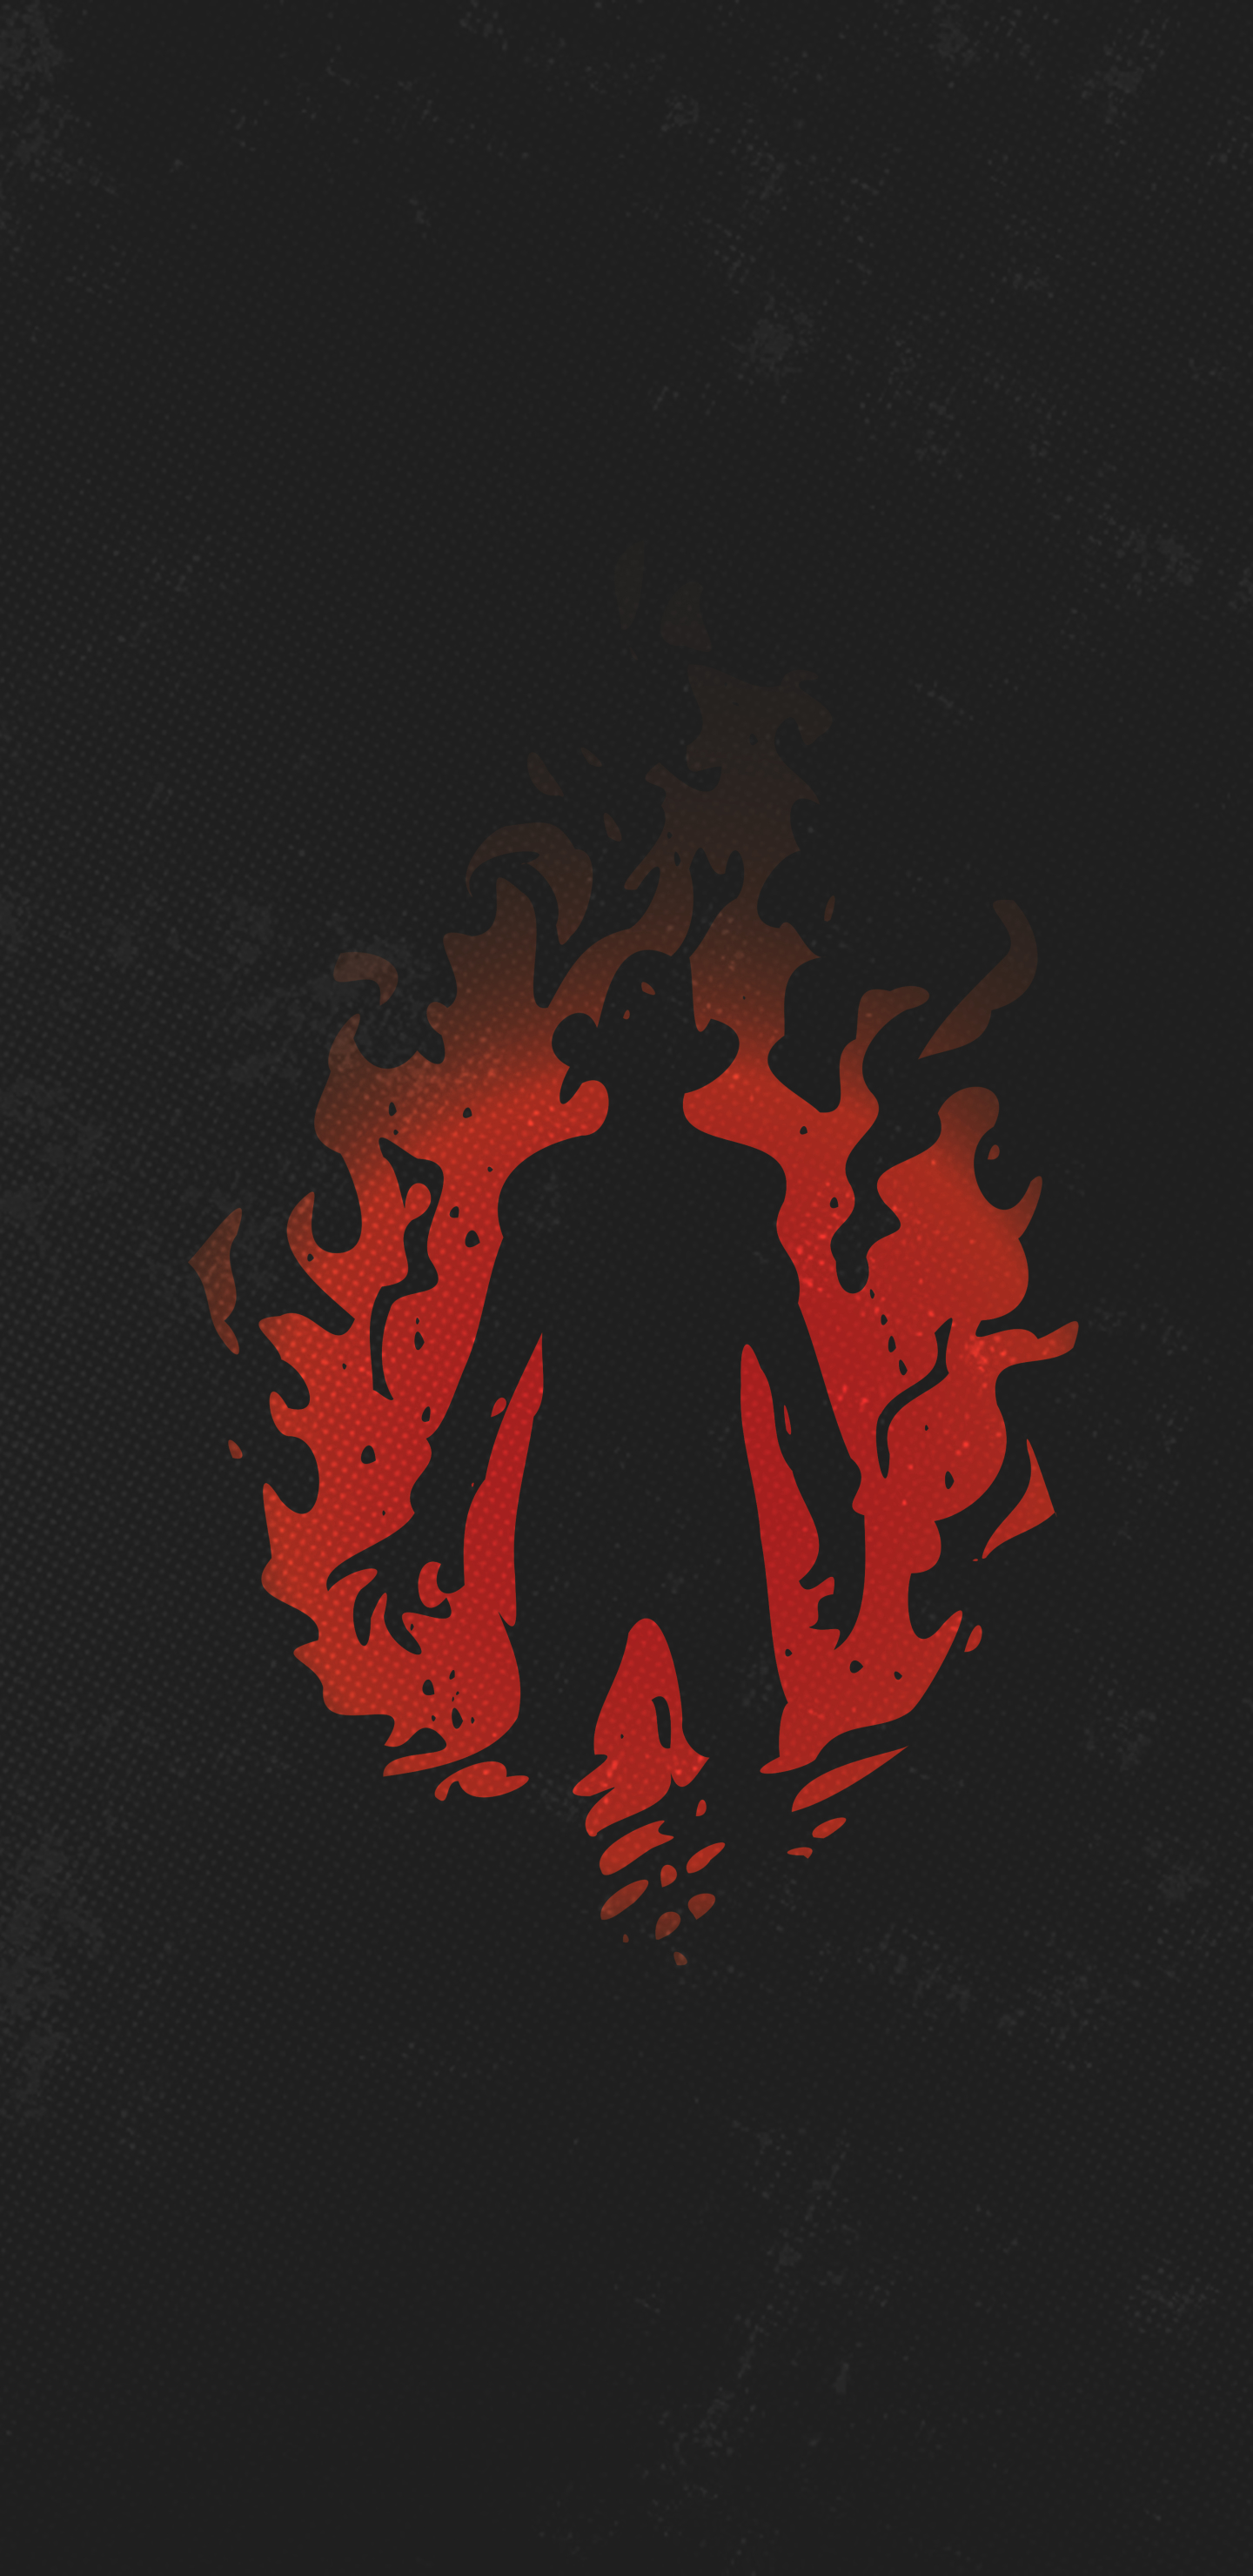 video game, dead by daylight, freddy krueger, minimalist, fire up (dead by daylight) for android